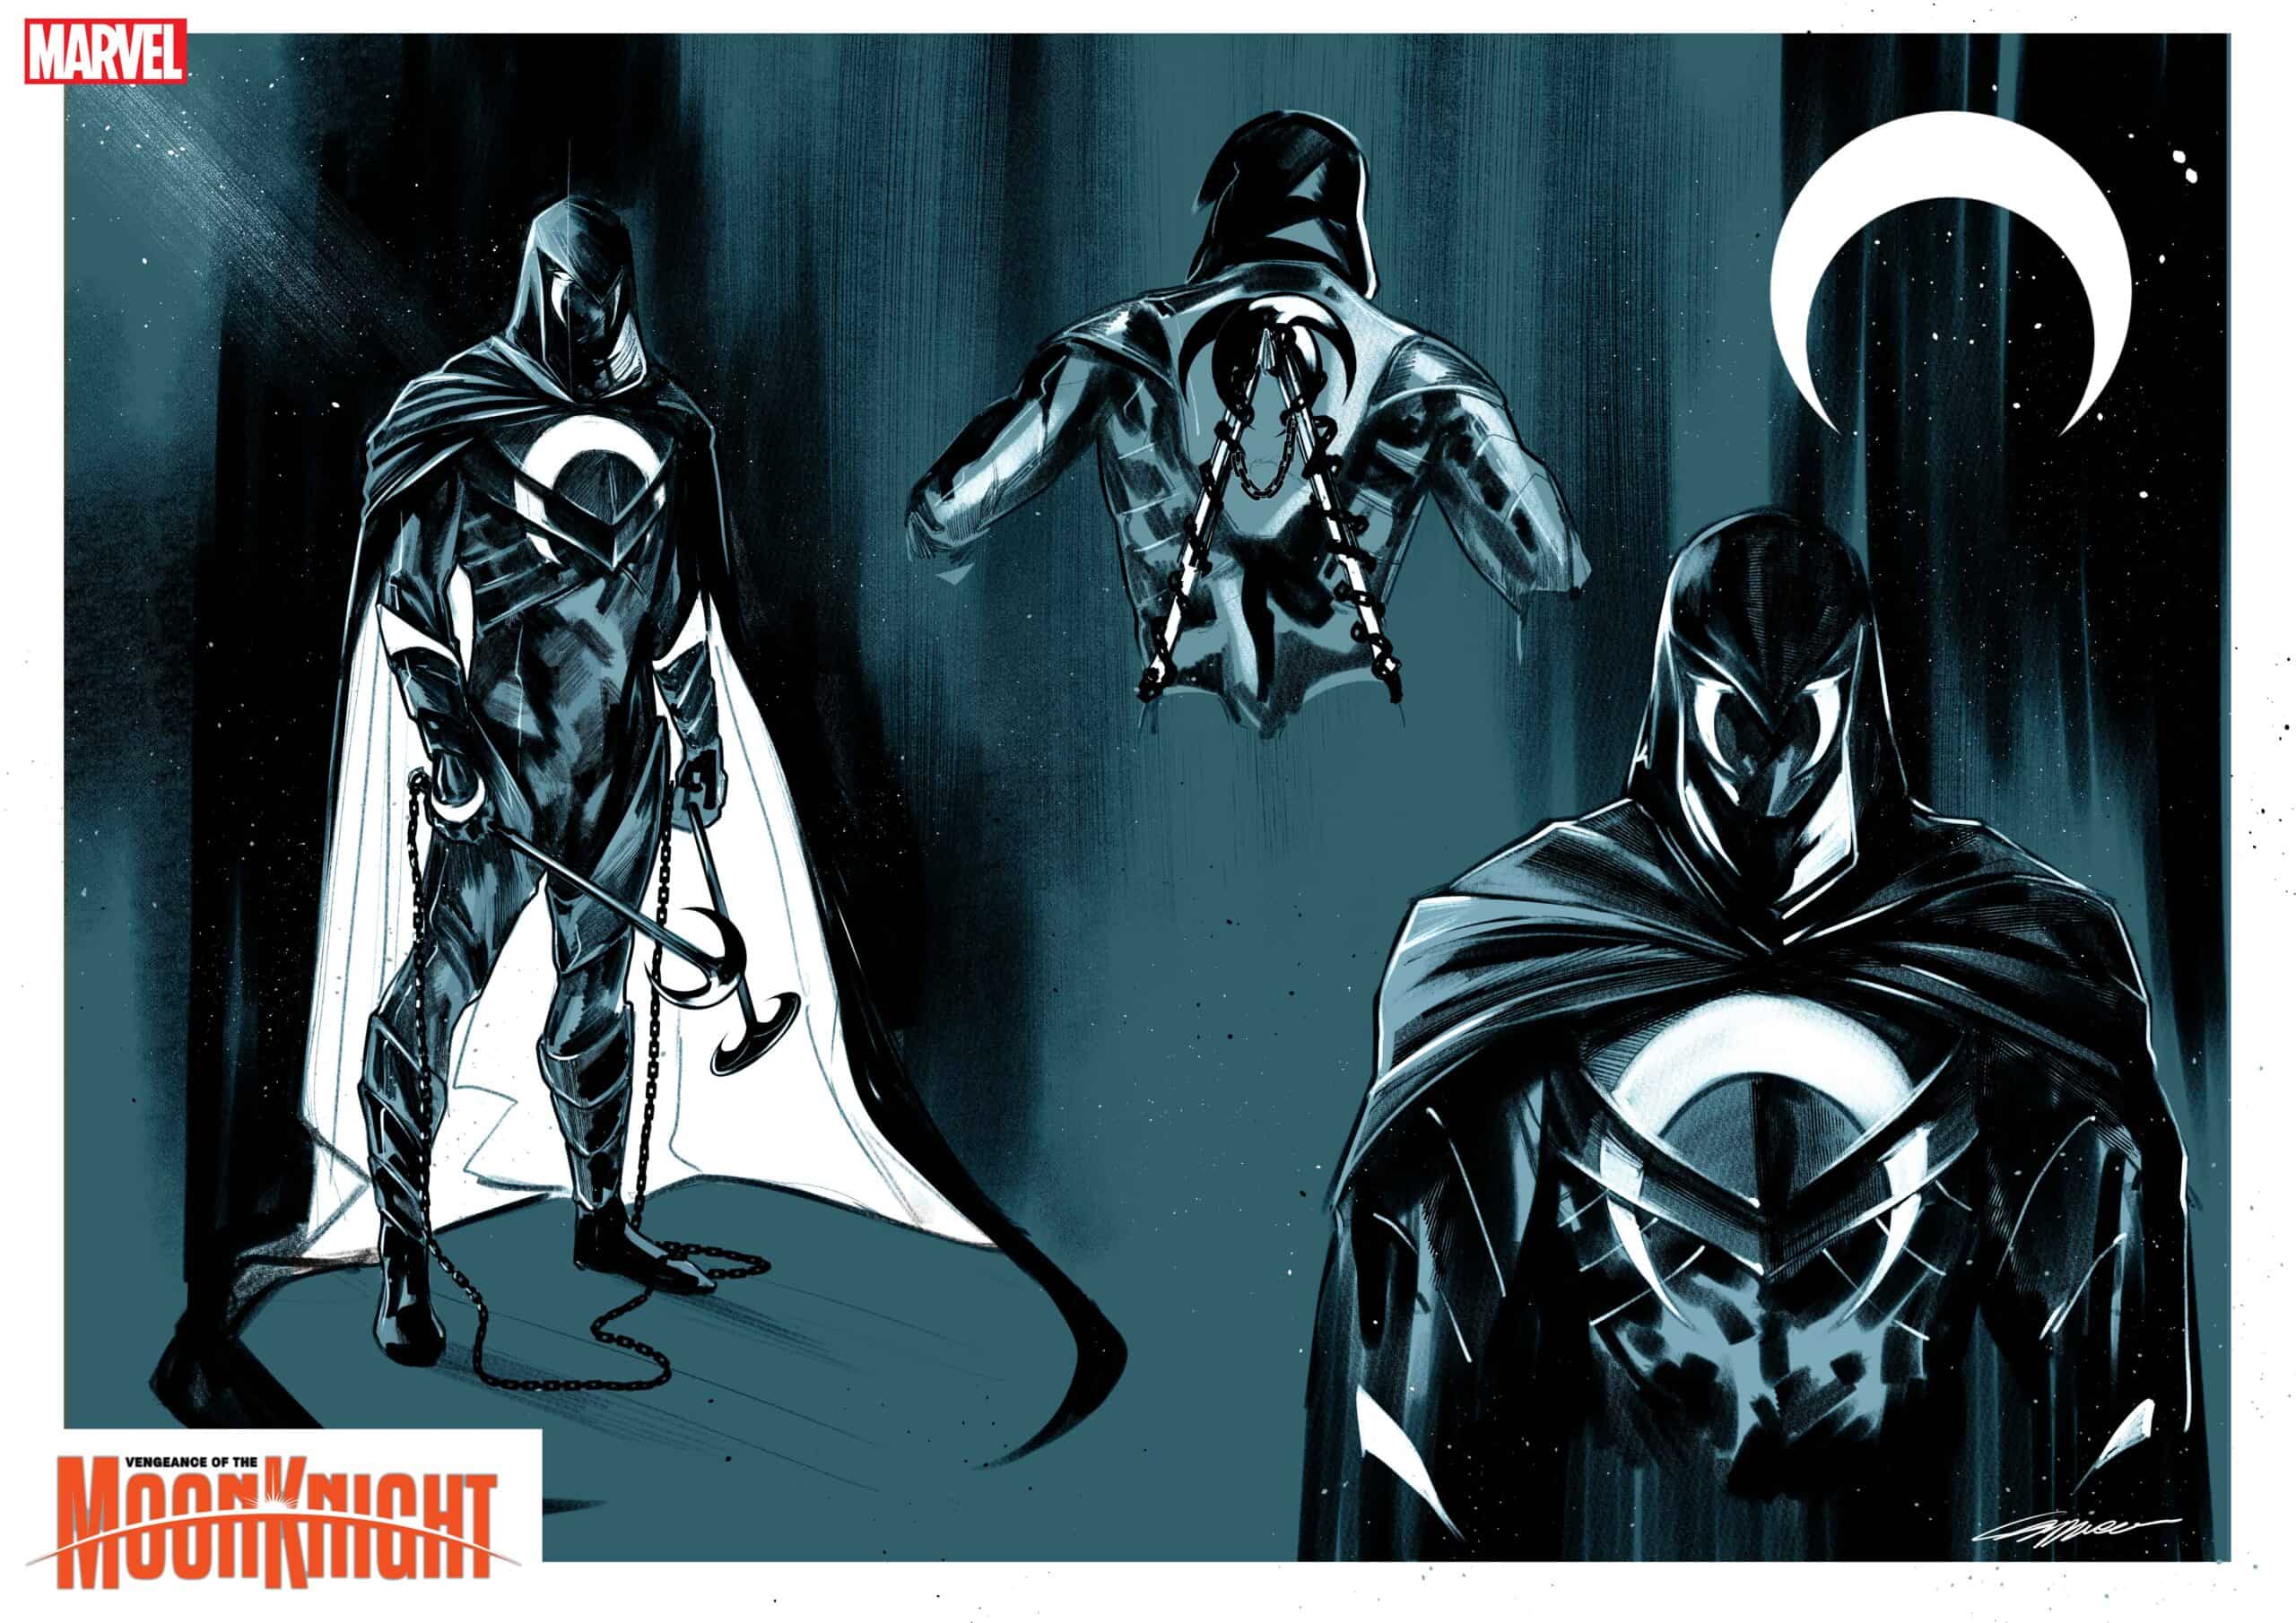 Need More Moon Knight? Here Are Six Titles Inspired by Ancient Egypt